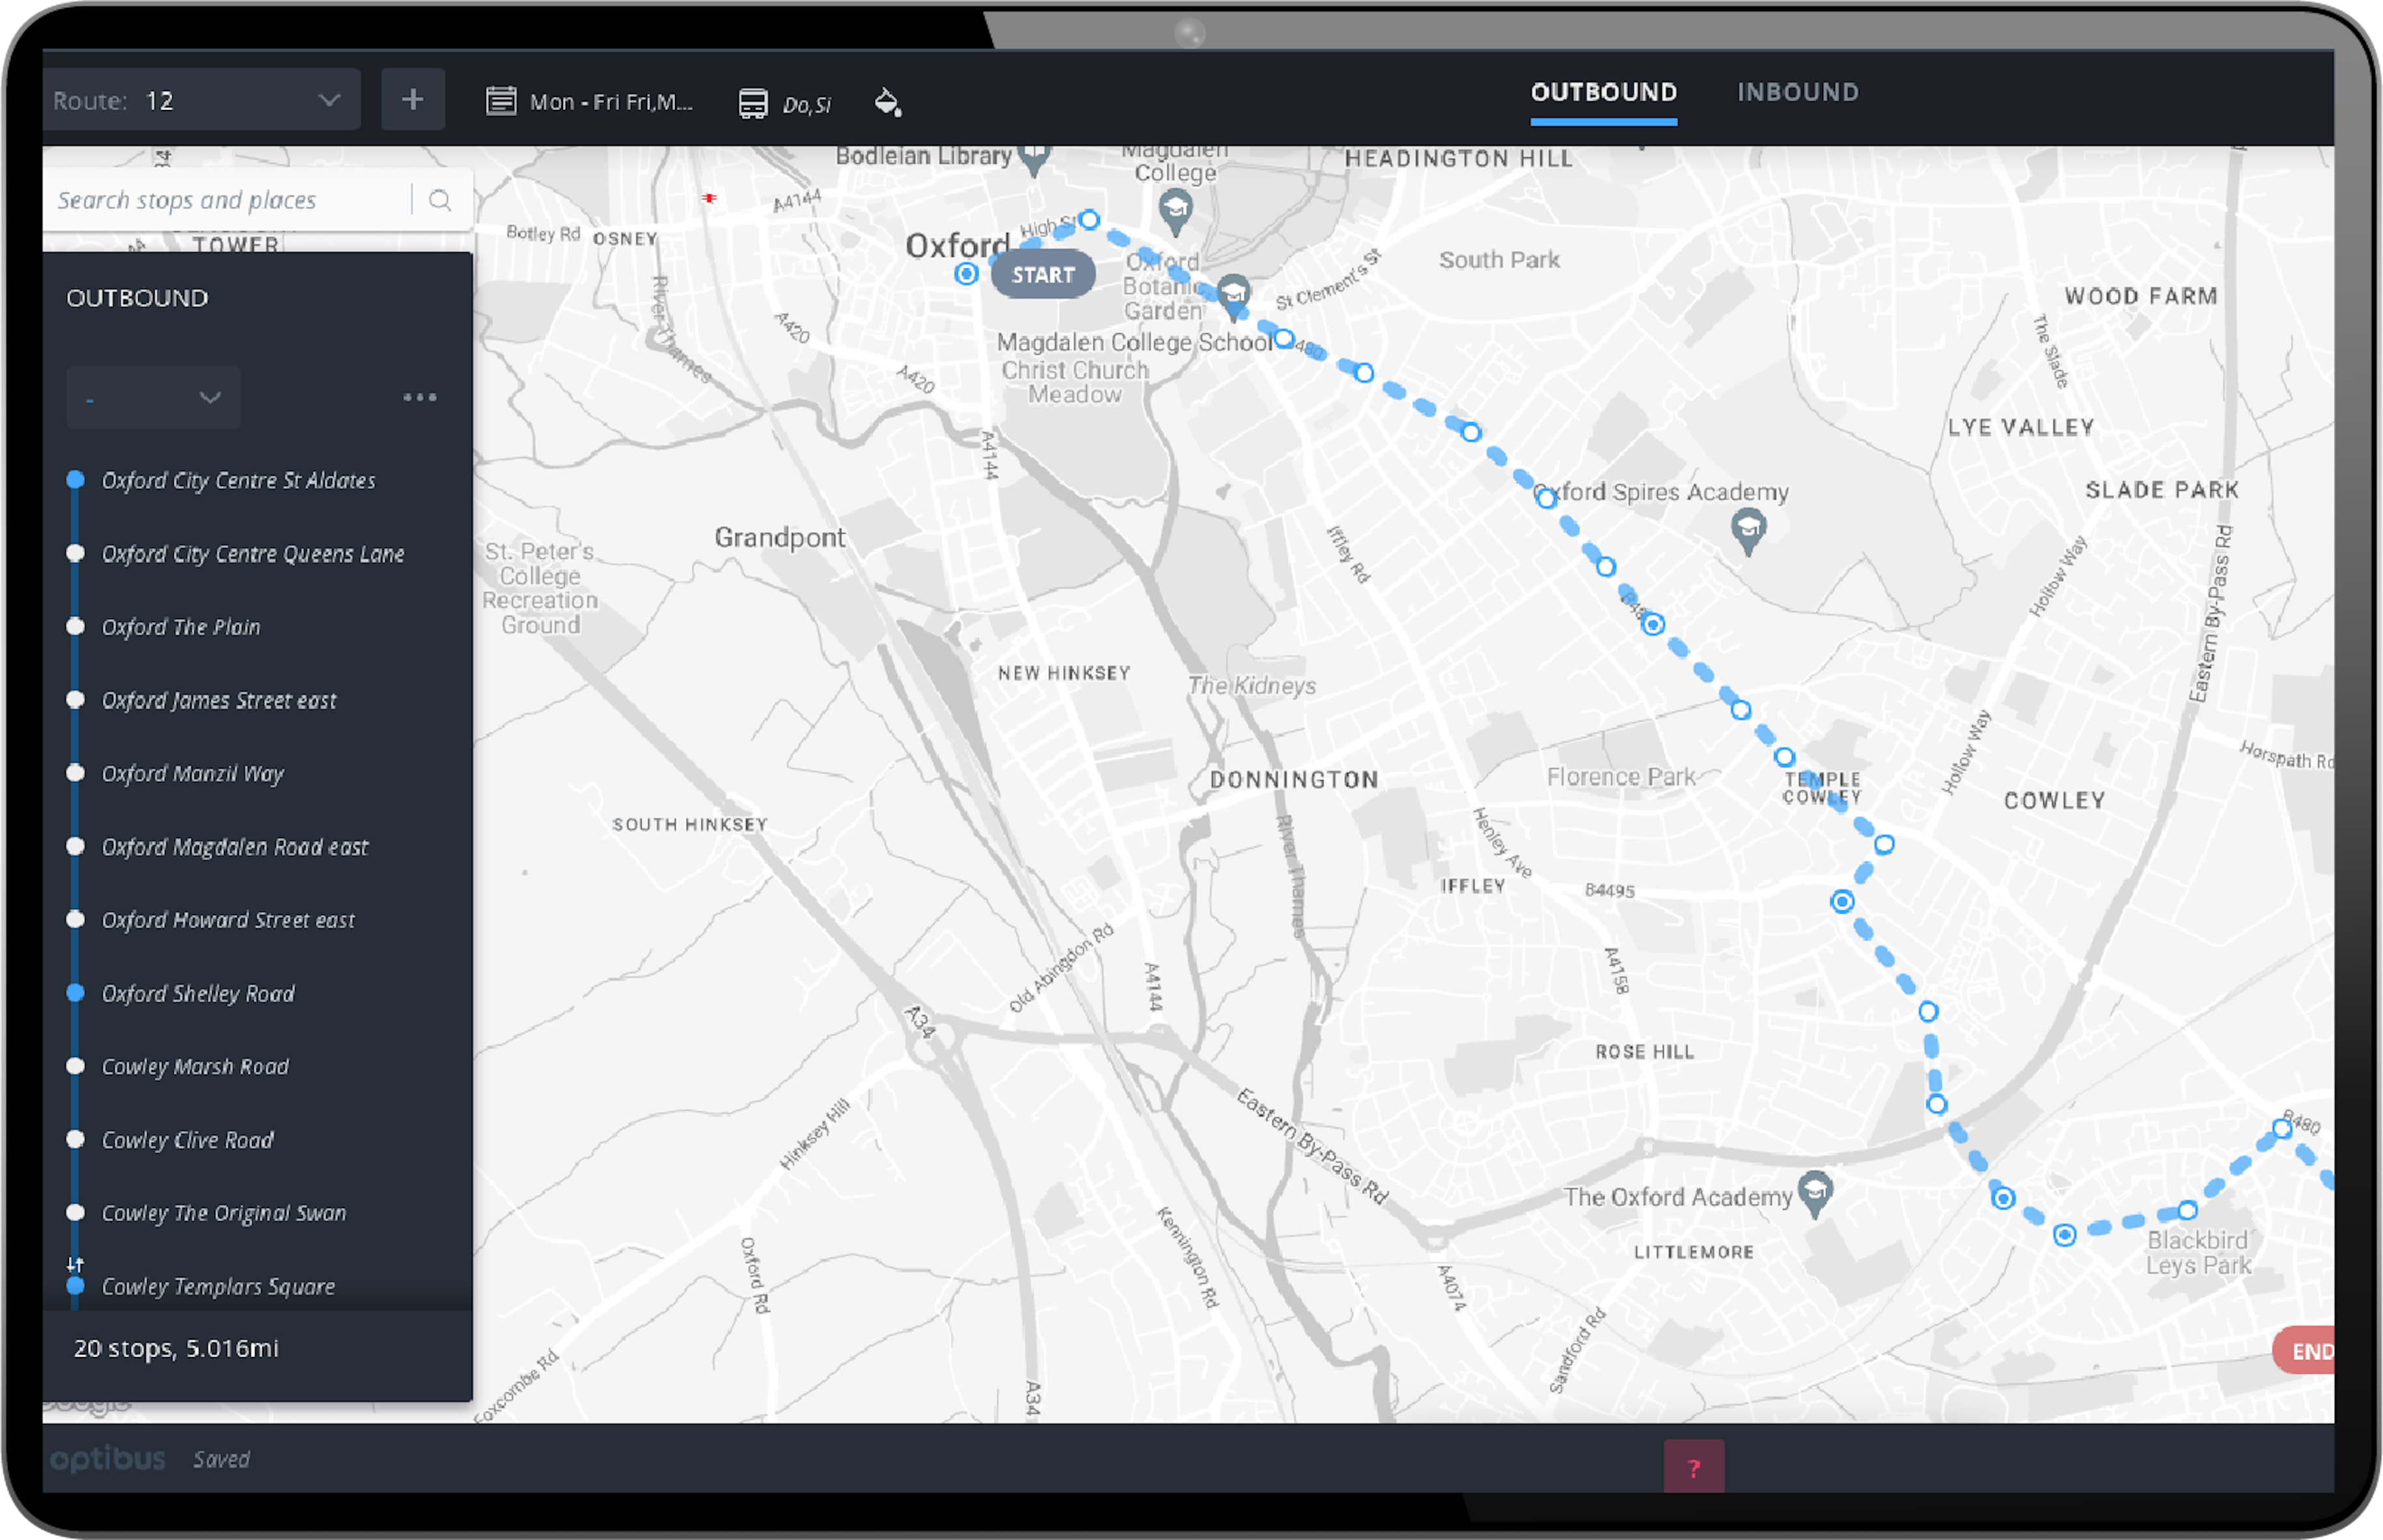 Optibus Planning enables users to easily visualize and analyze their network and create efficient routes and timetables all in one place.